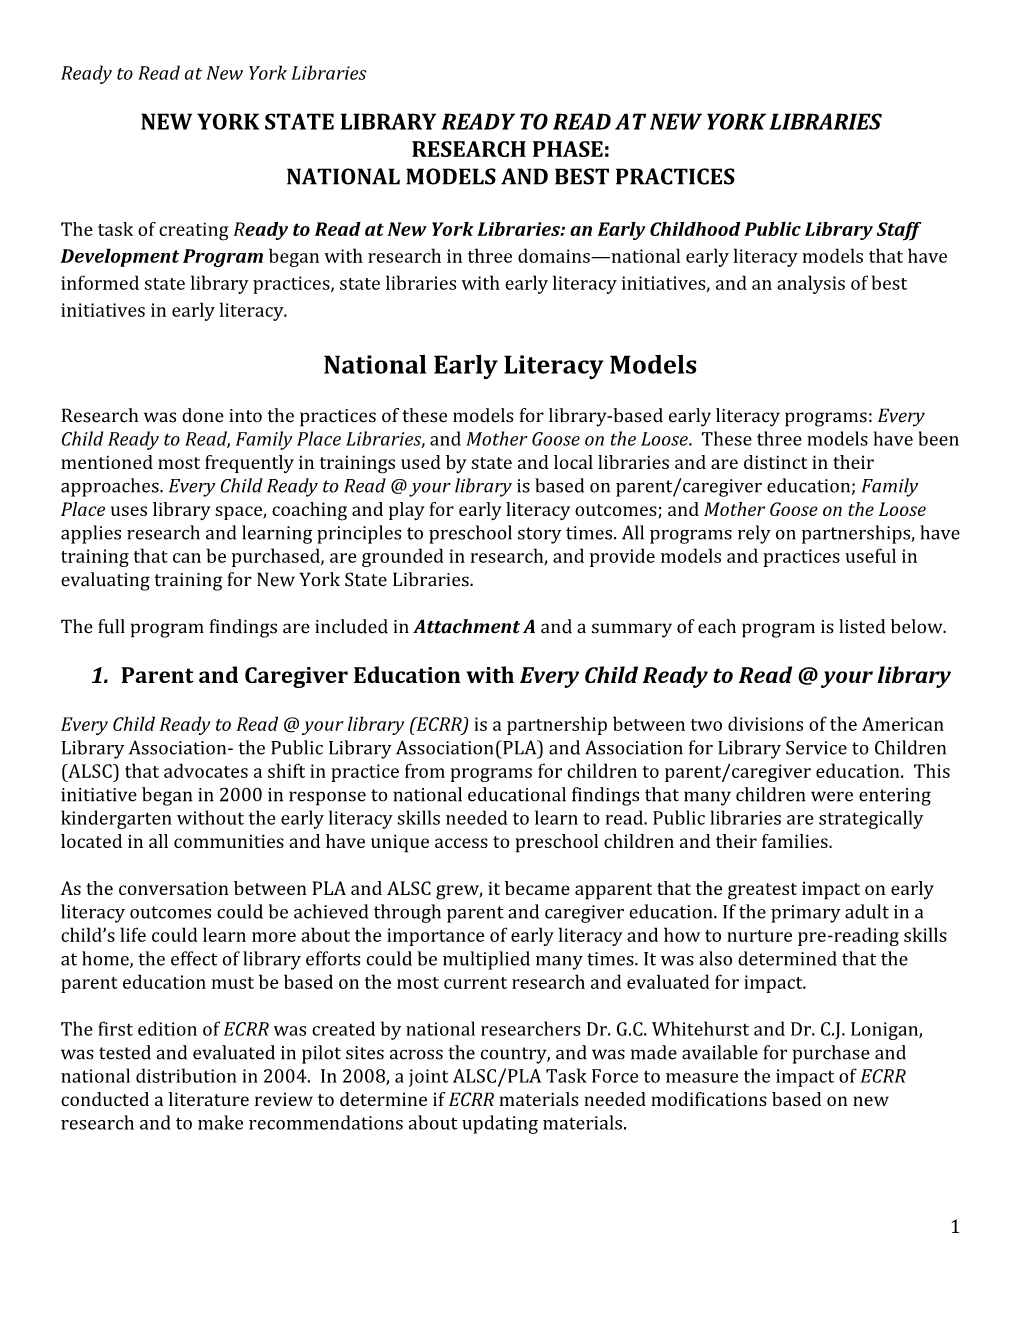 National Early Literacy Models